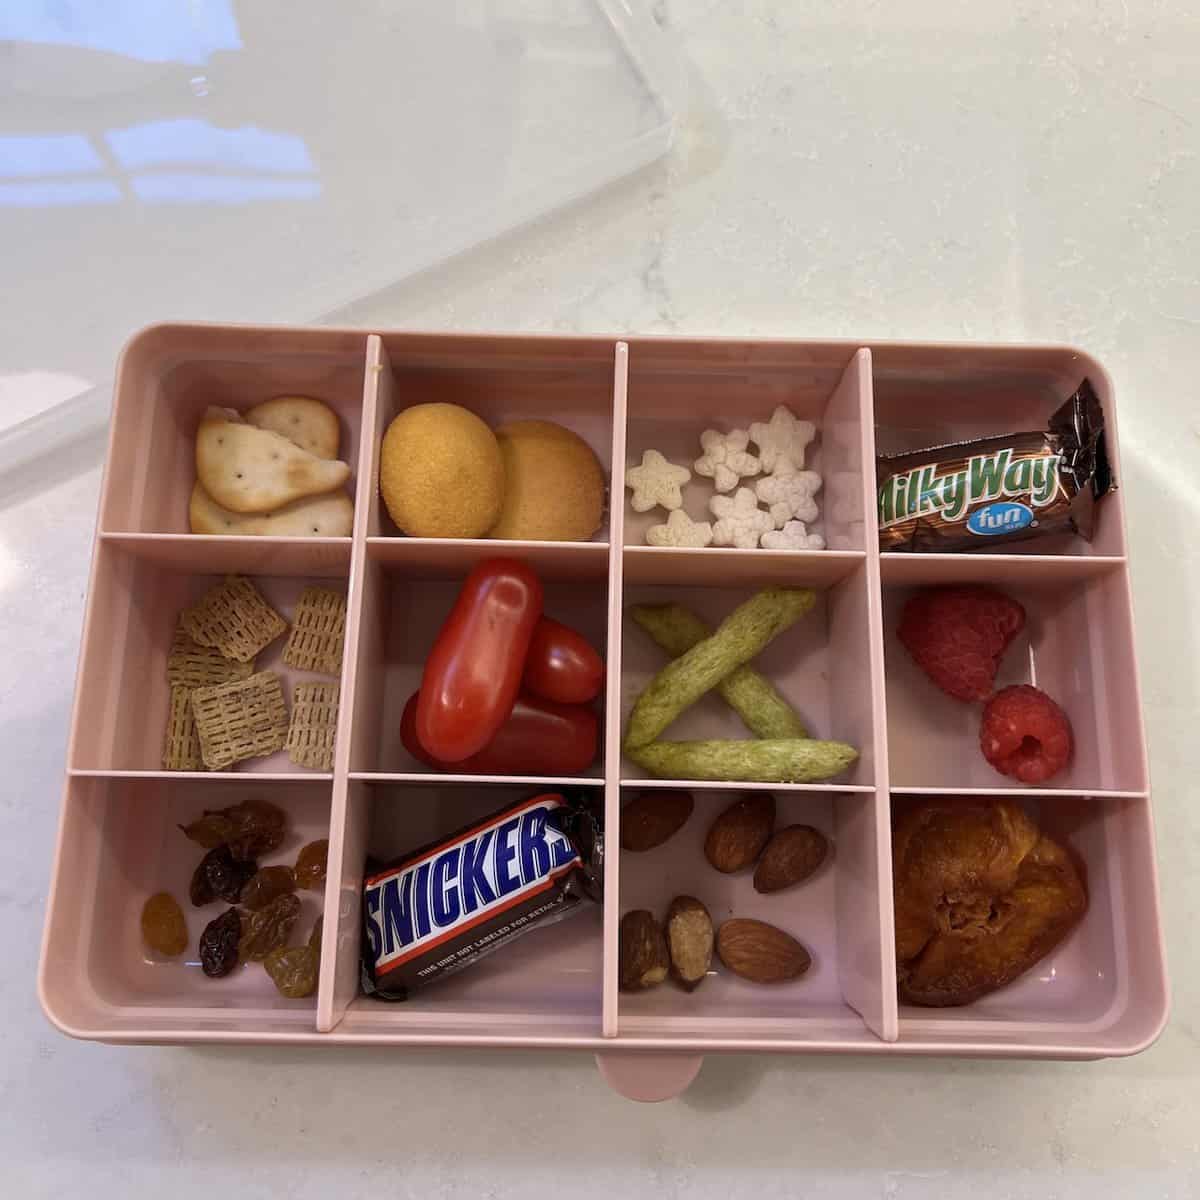 15 Clever Snackle Box Ideas - Drizzle Me Skinny!